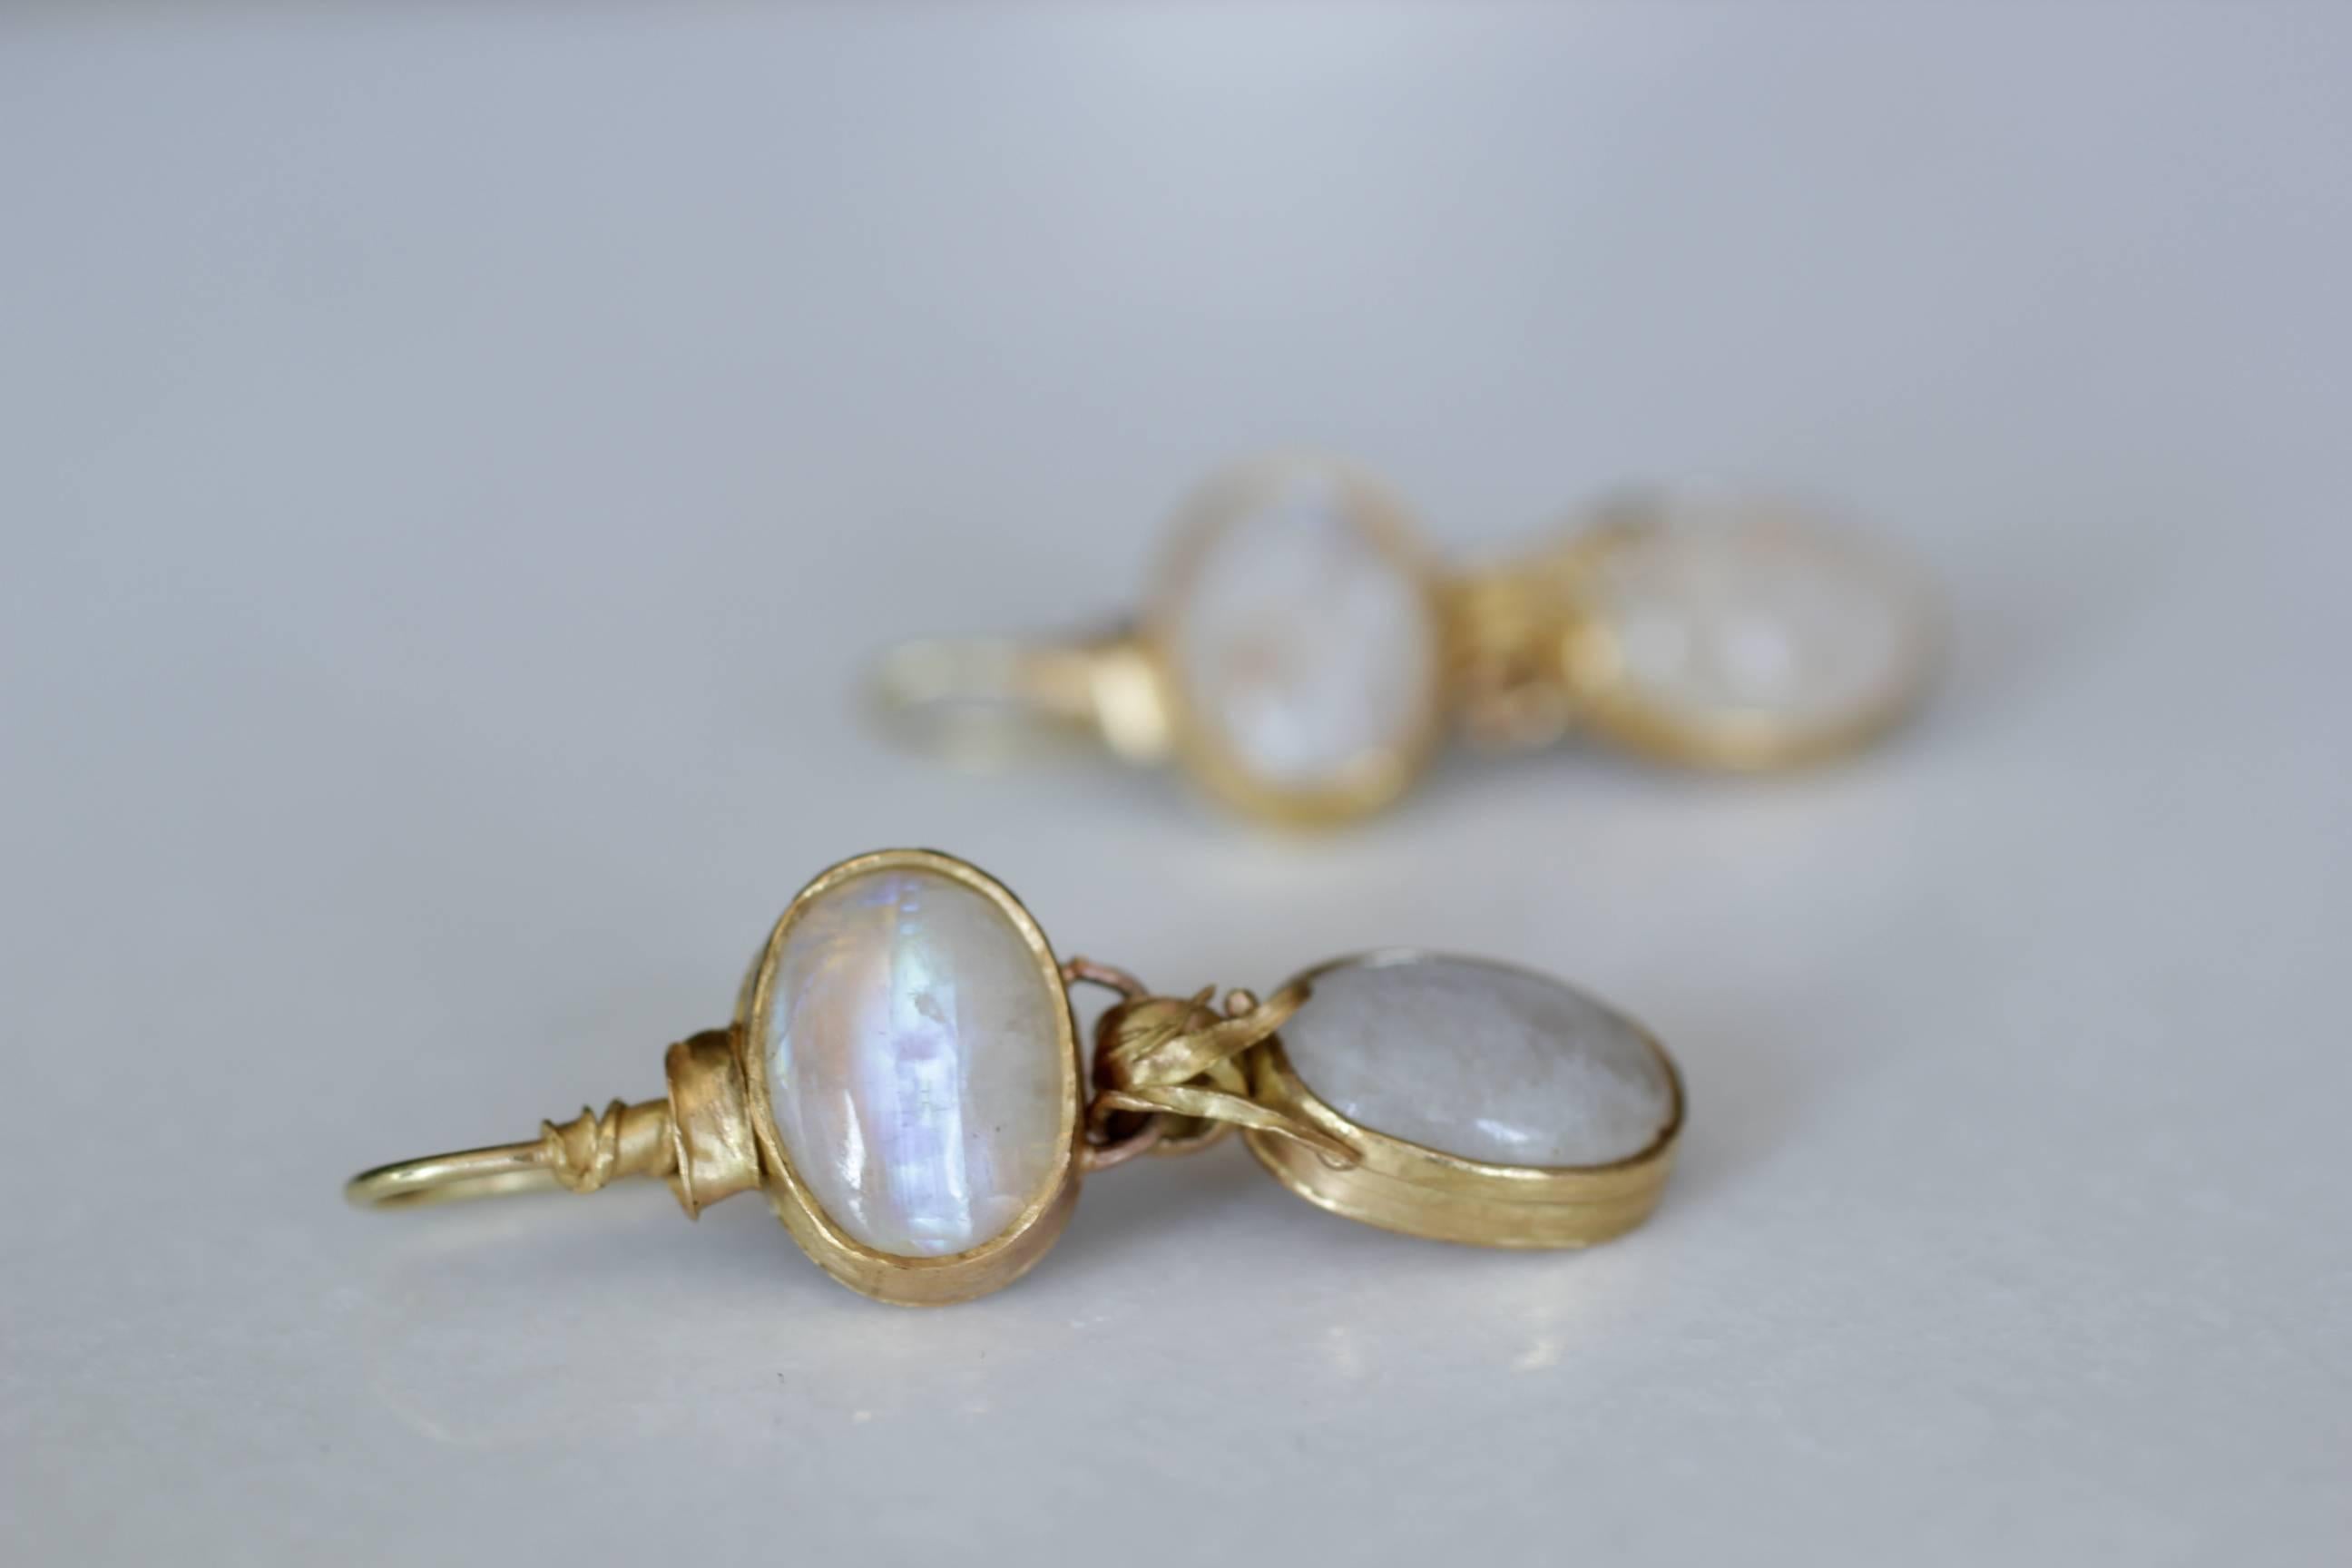 Moonlight Earrings. Beautiful one-of-a-kind handmade 21K gold dangle drop earrings set with moonstones, inspired by the organic shapes of the sea and blades of grass. Feminine and elegant, these earrings will surely start a conversation.

The